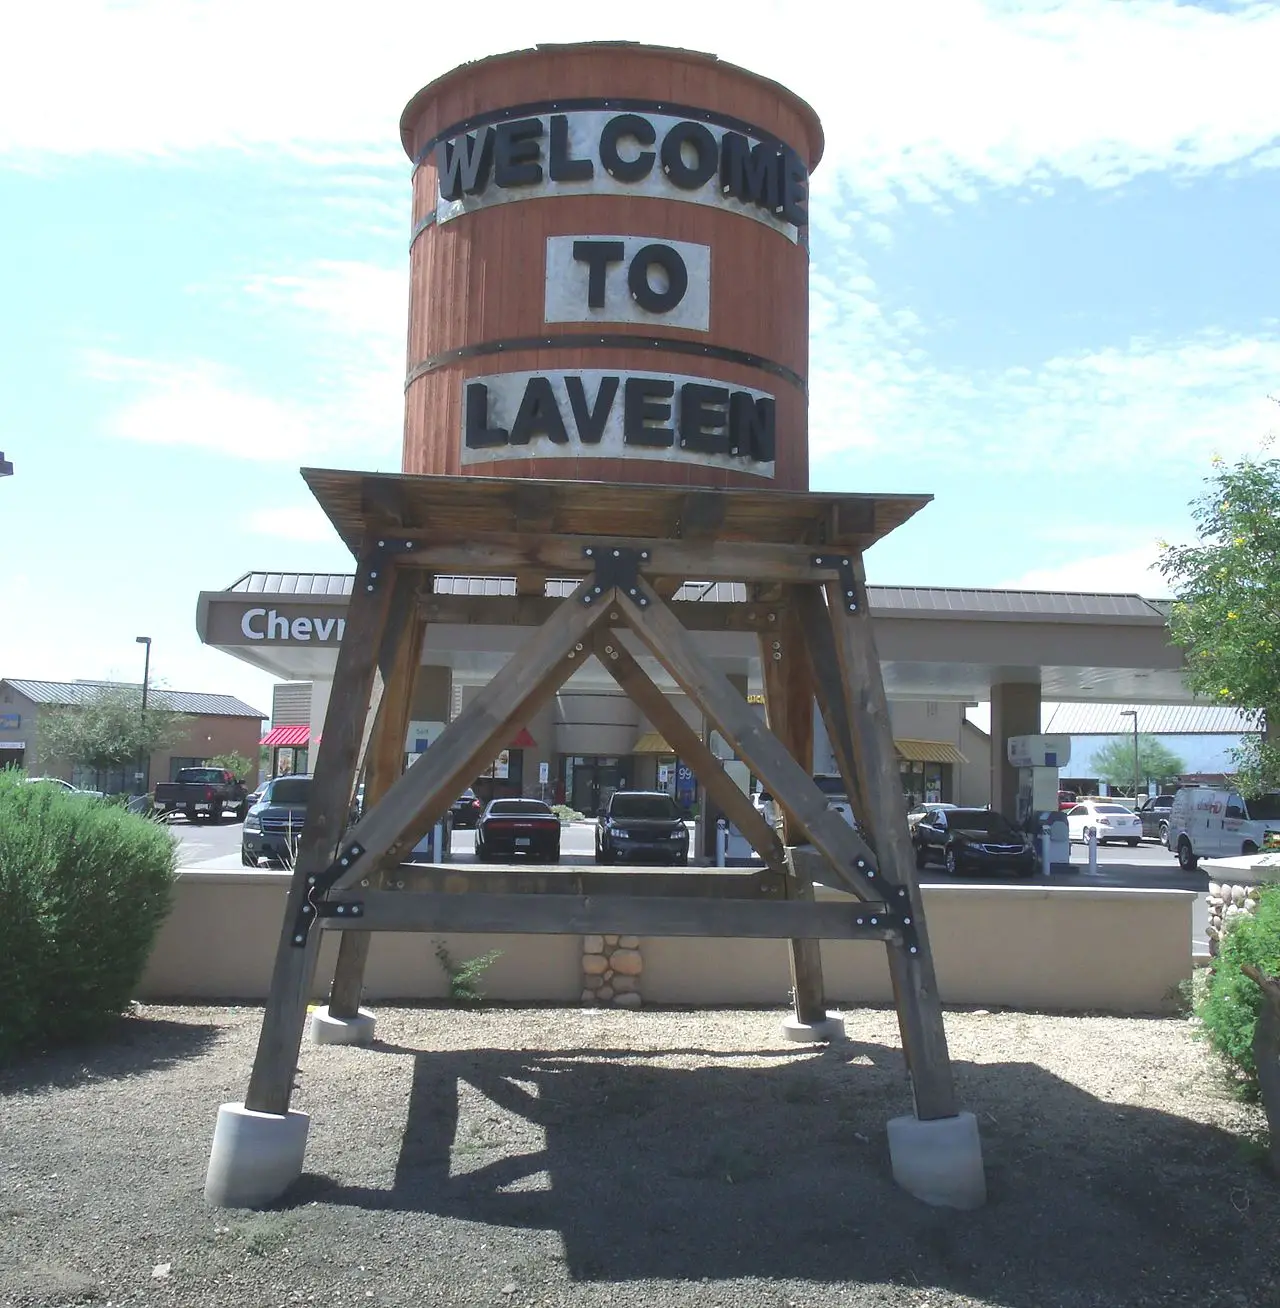 Phoenix Laveen Urban Village- A Gem in the Heart of the Sun Valley - Photo Source